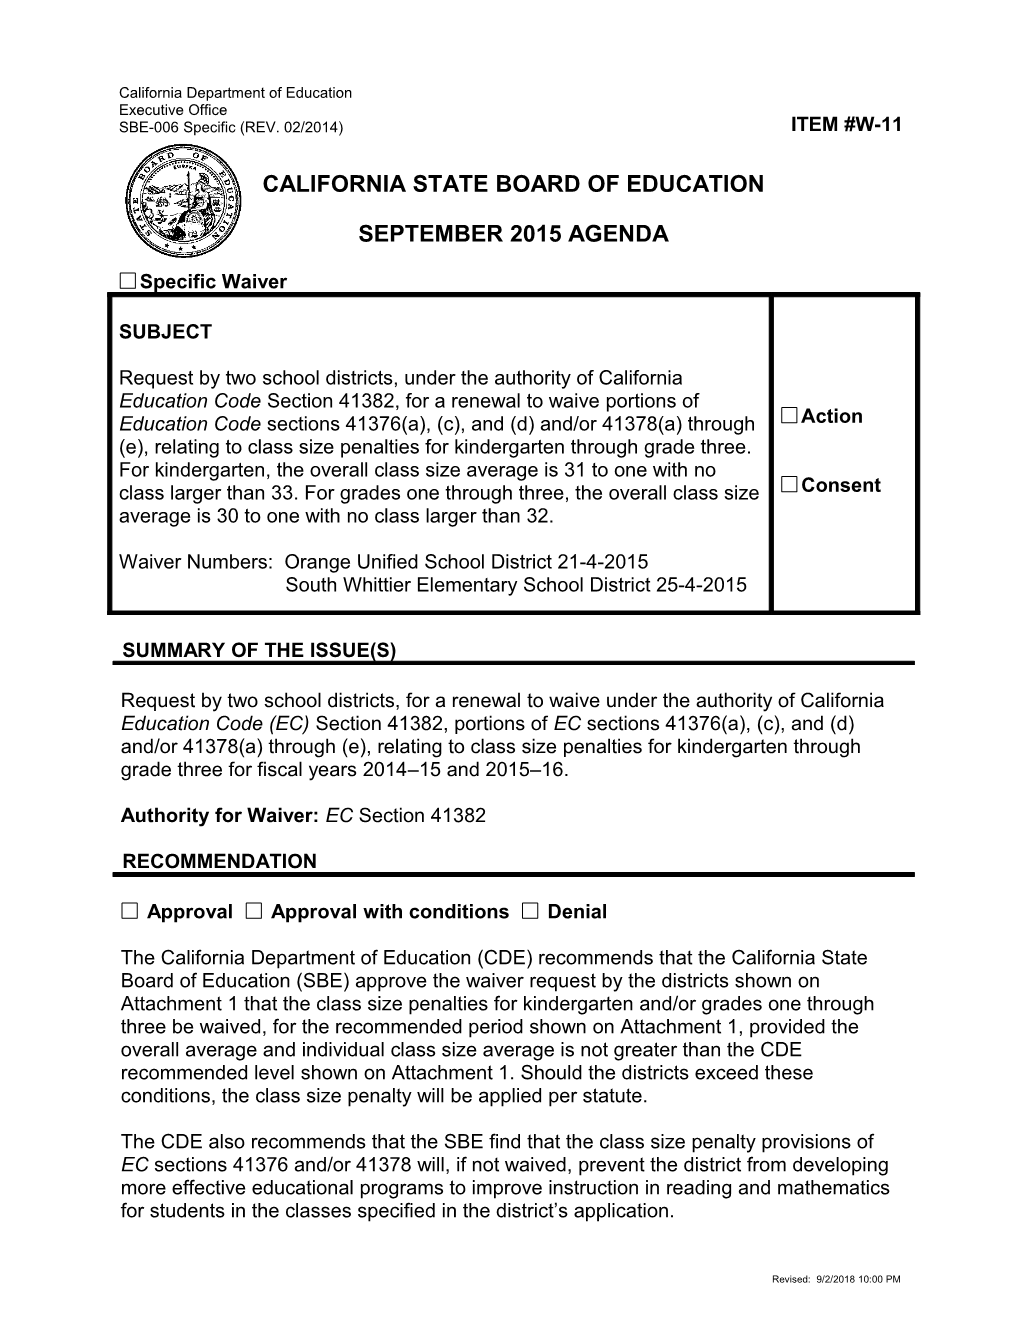 September 2015 Waiver Item W-11 - Meeting Agendas (CA State Board of Education)